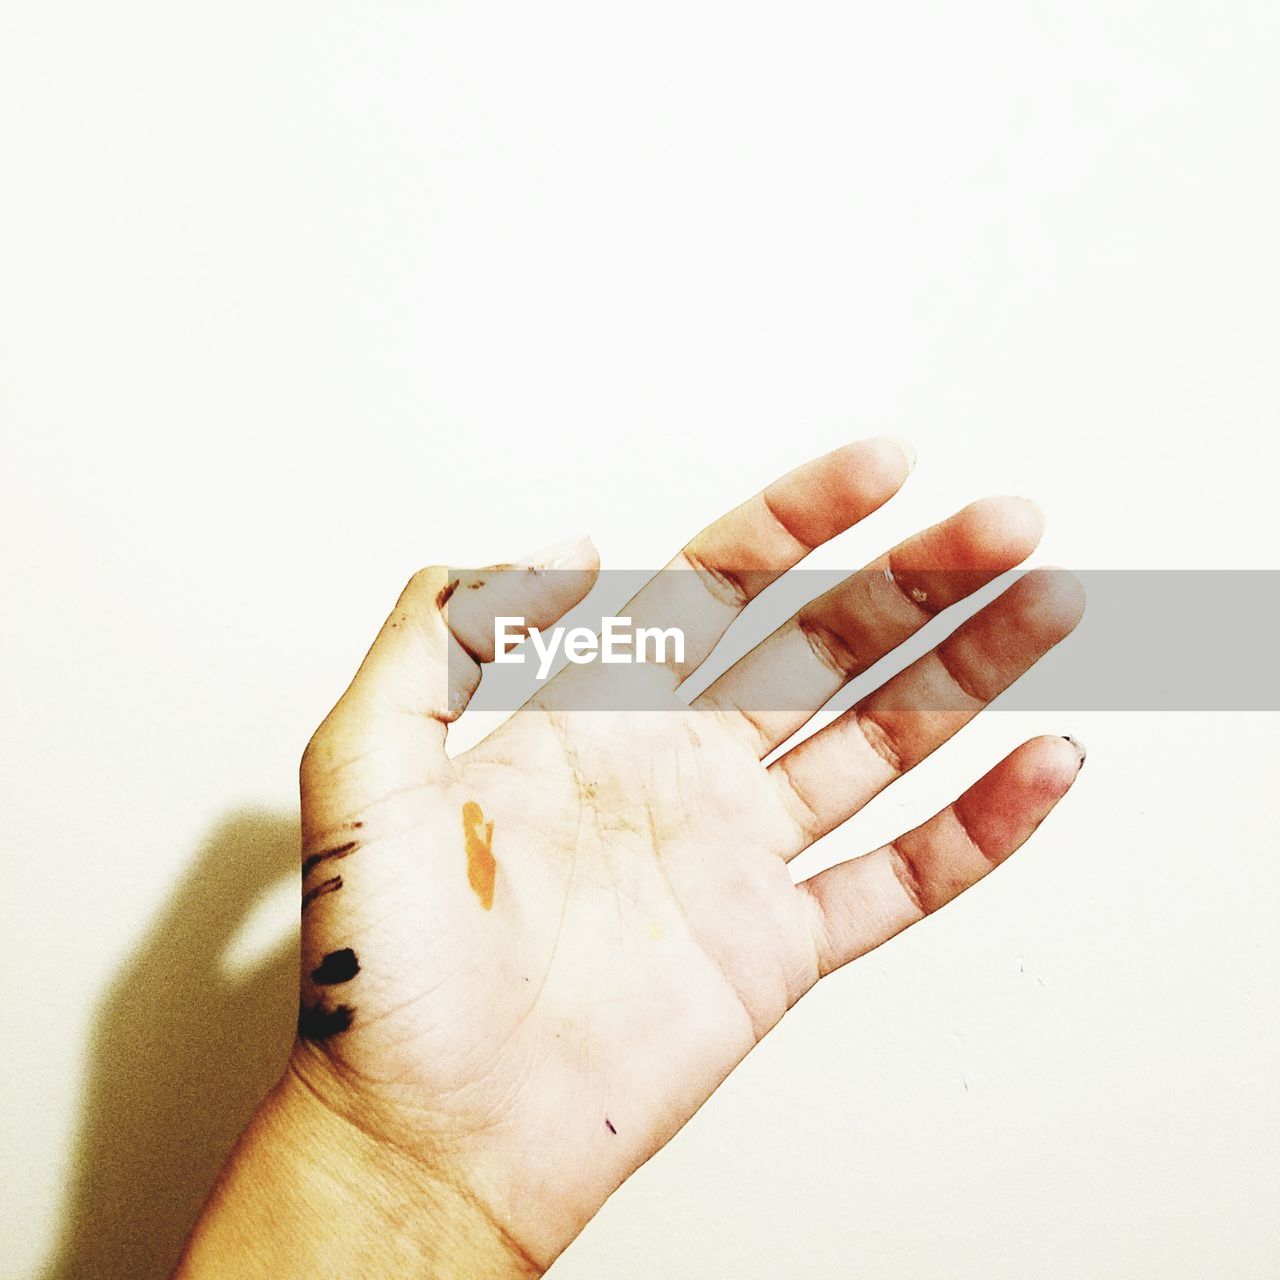 CLOSE-UP OF HAND HOLDING LEAF AGAINST WHITE BACKGROUND